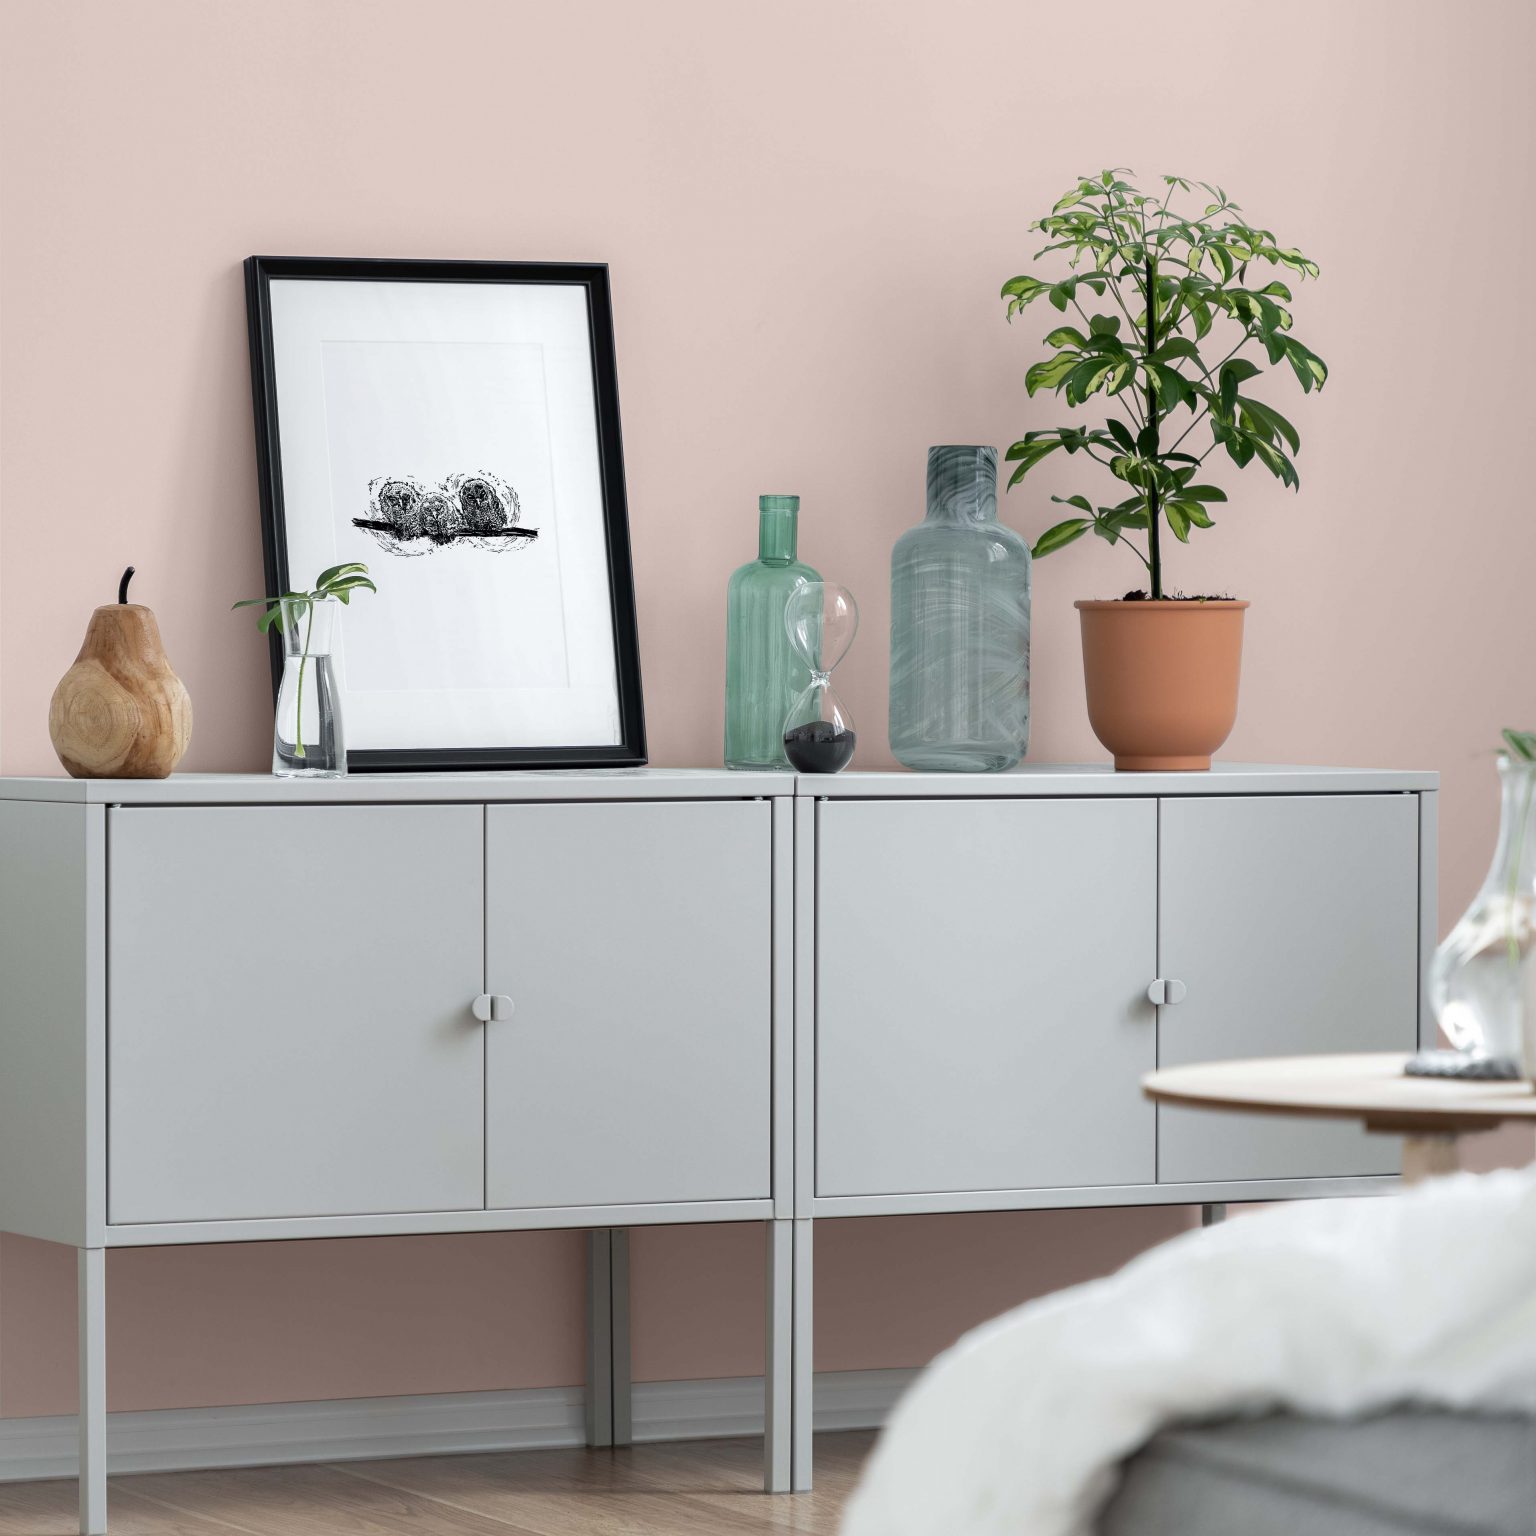 A closeup of a room with walls painted in a neutral light pink colour, styled with a simple grey sideboard and a variety of décor pieces